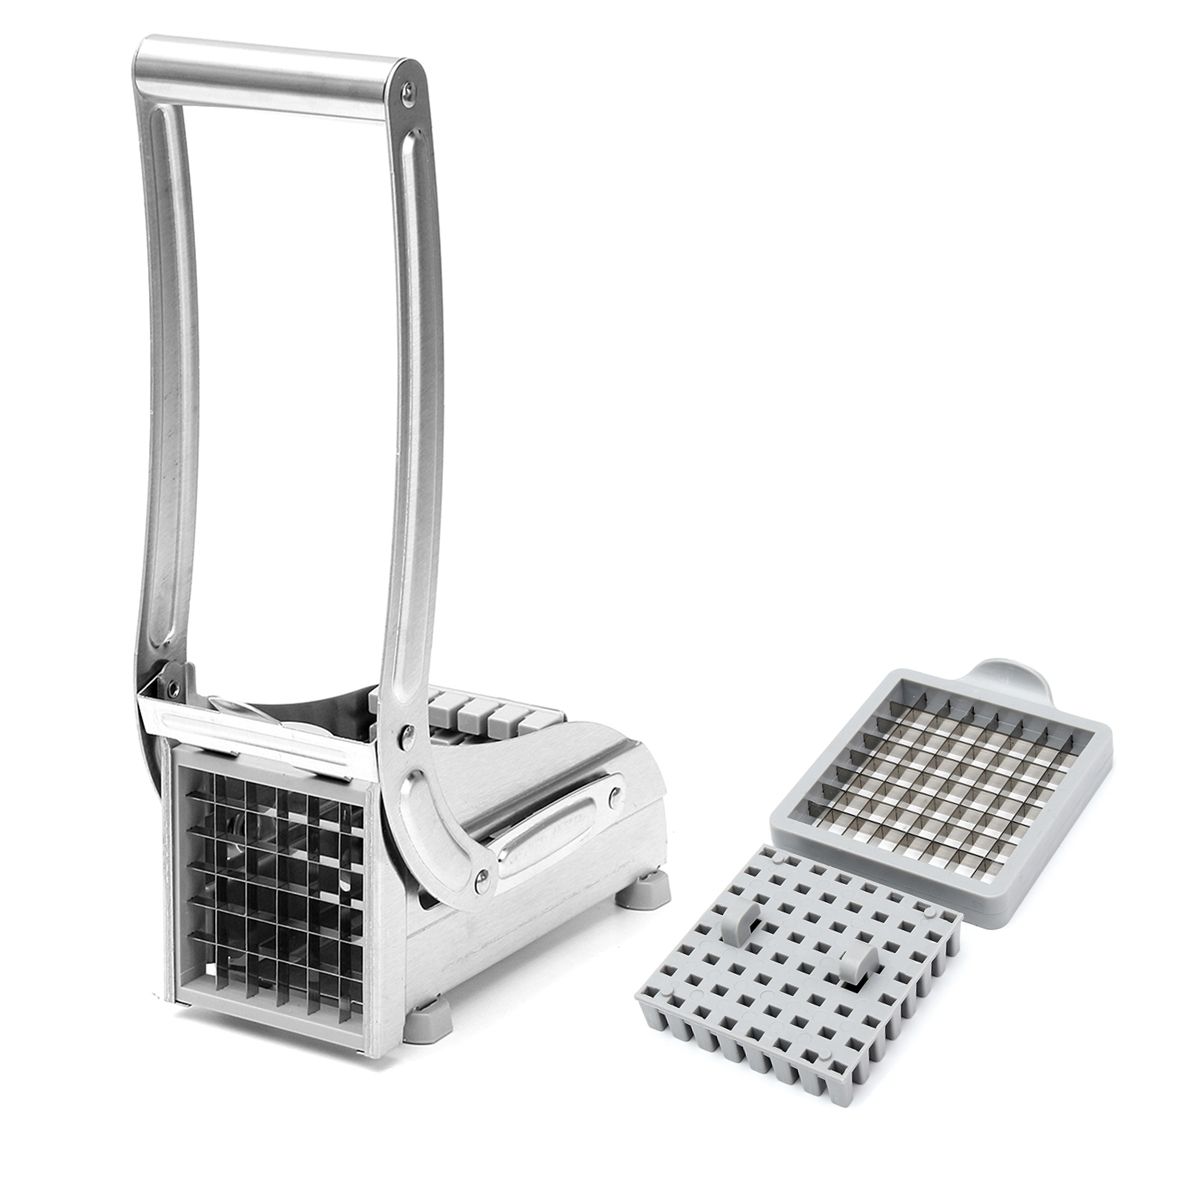 Stainless-Steel-French-Fry-Potato-Cutter-Maker-Slicer-Chopper-Dicer-with-2-Bllades-Vegetable-Cutter-1197223